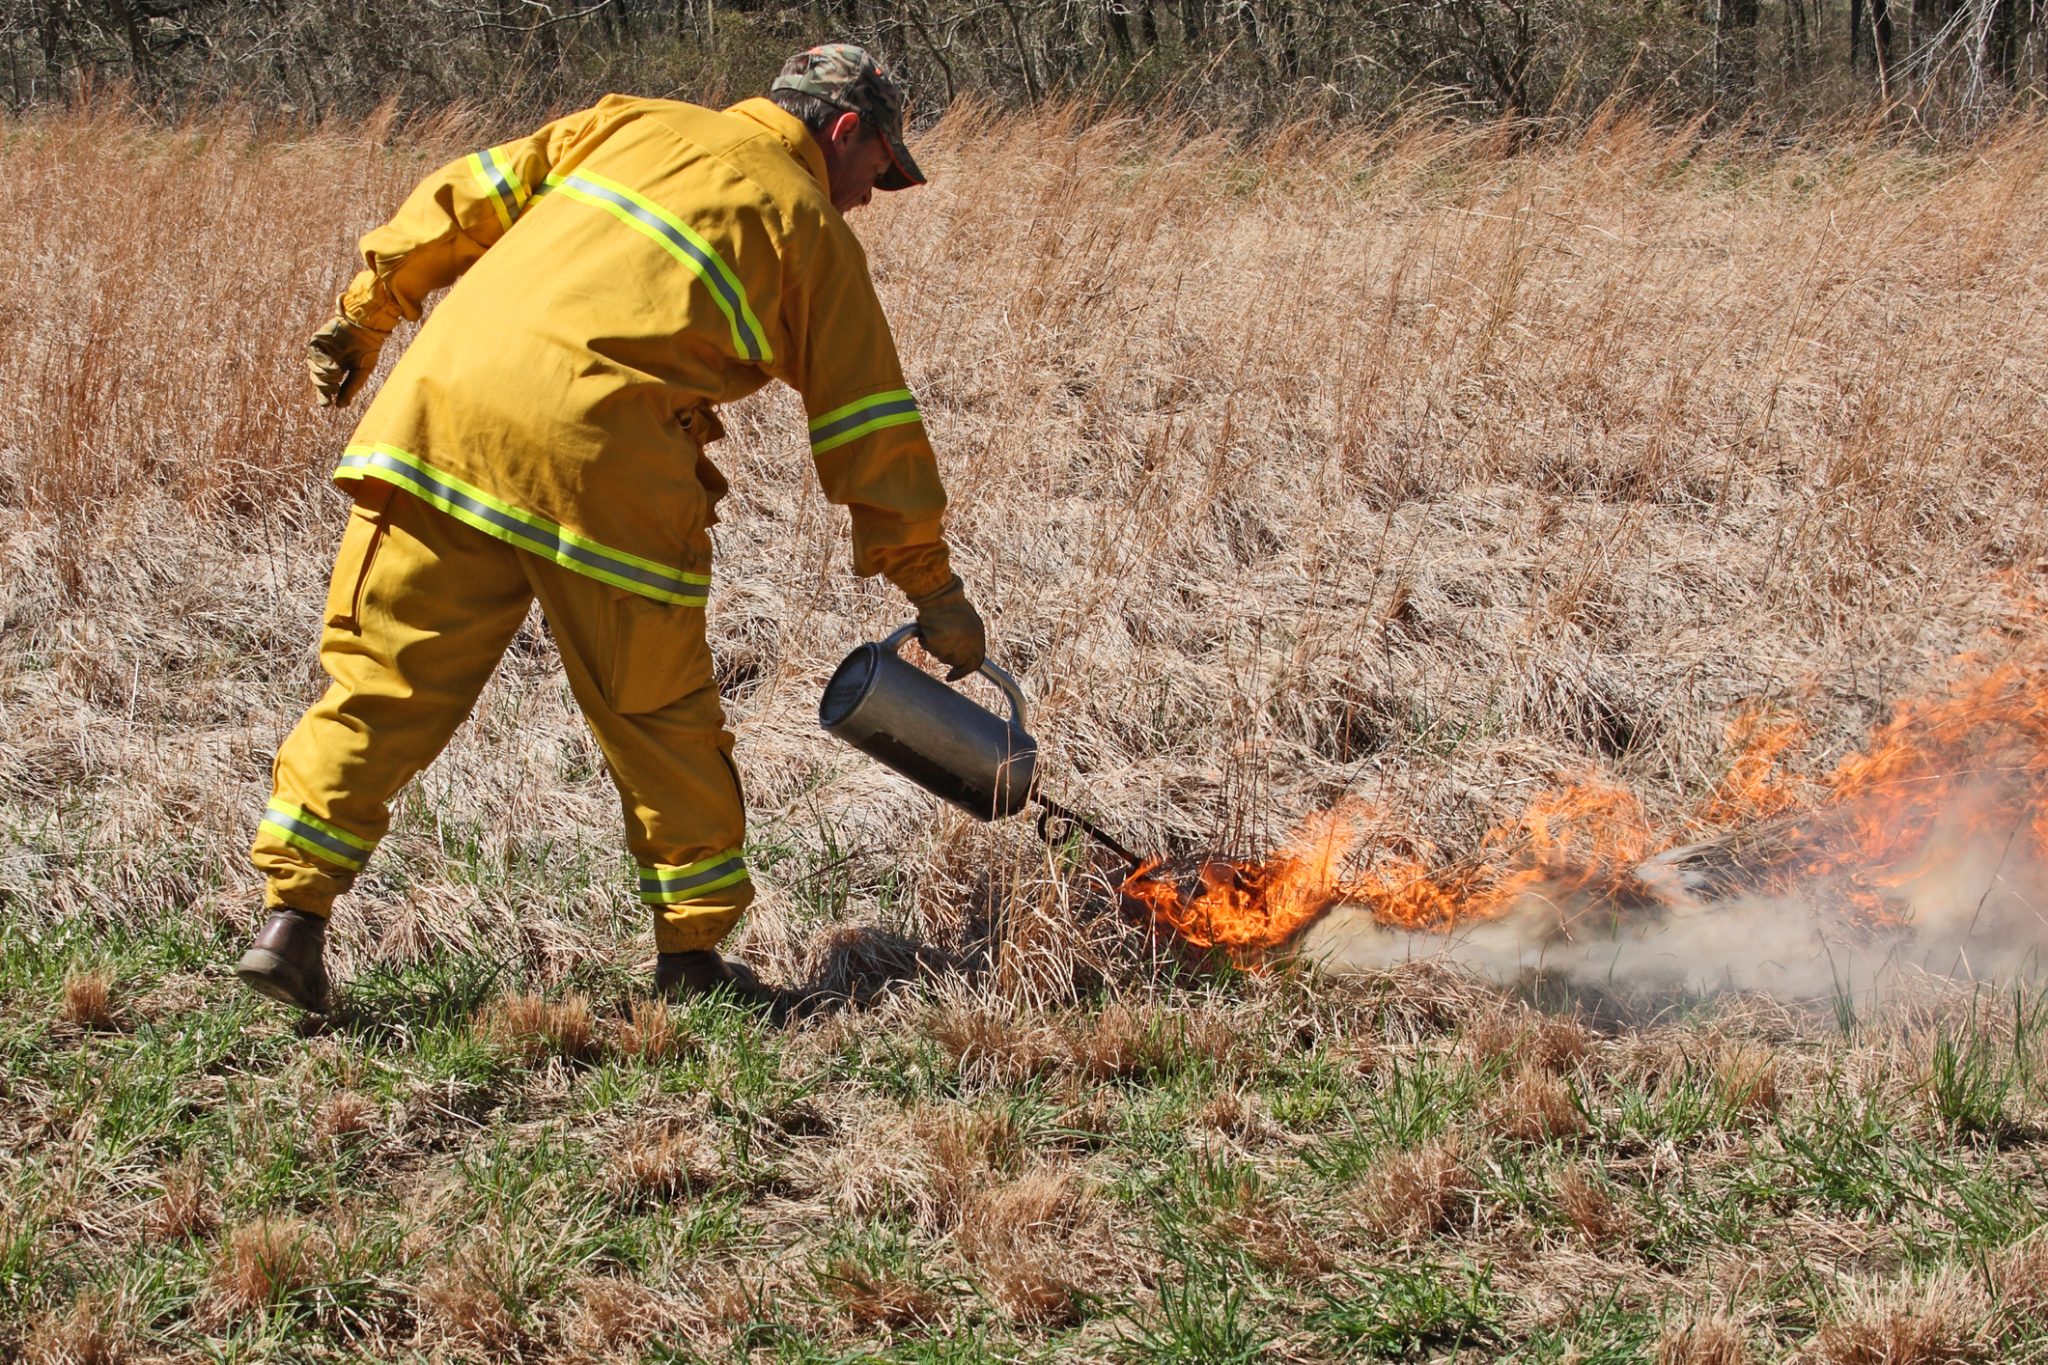 Firefighter performs a controlled burn using a burn pot filled with diesel fuel and gasoline to start the fires